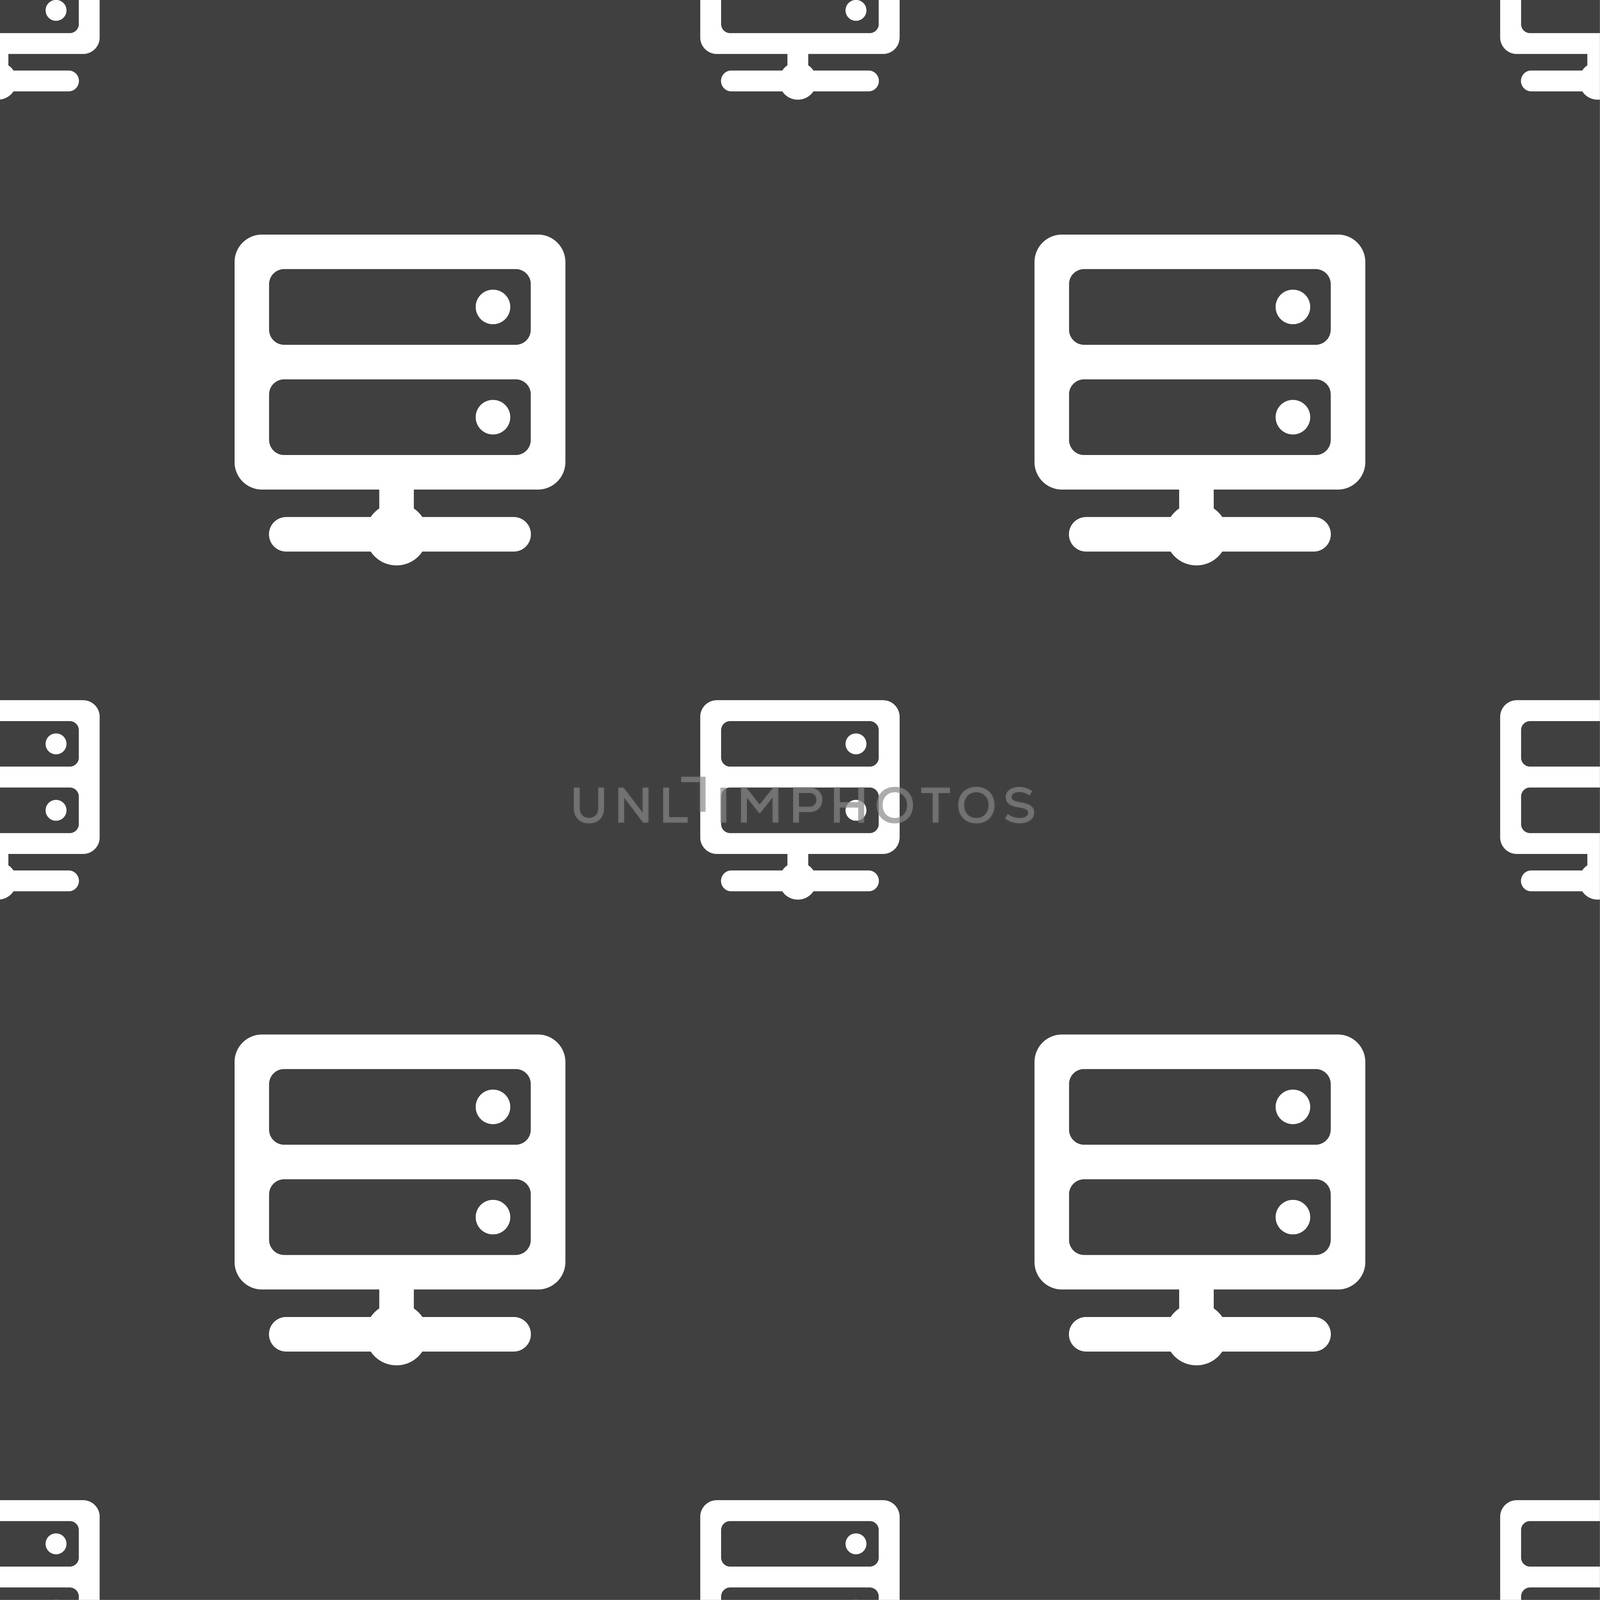 Server icon sign. Seamless pattern on a gray background. illustration